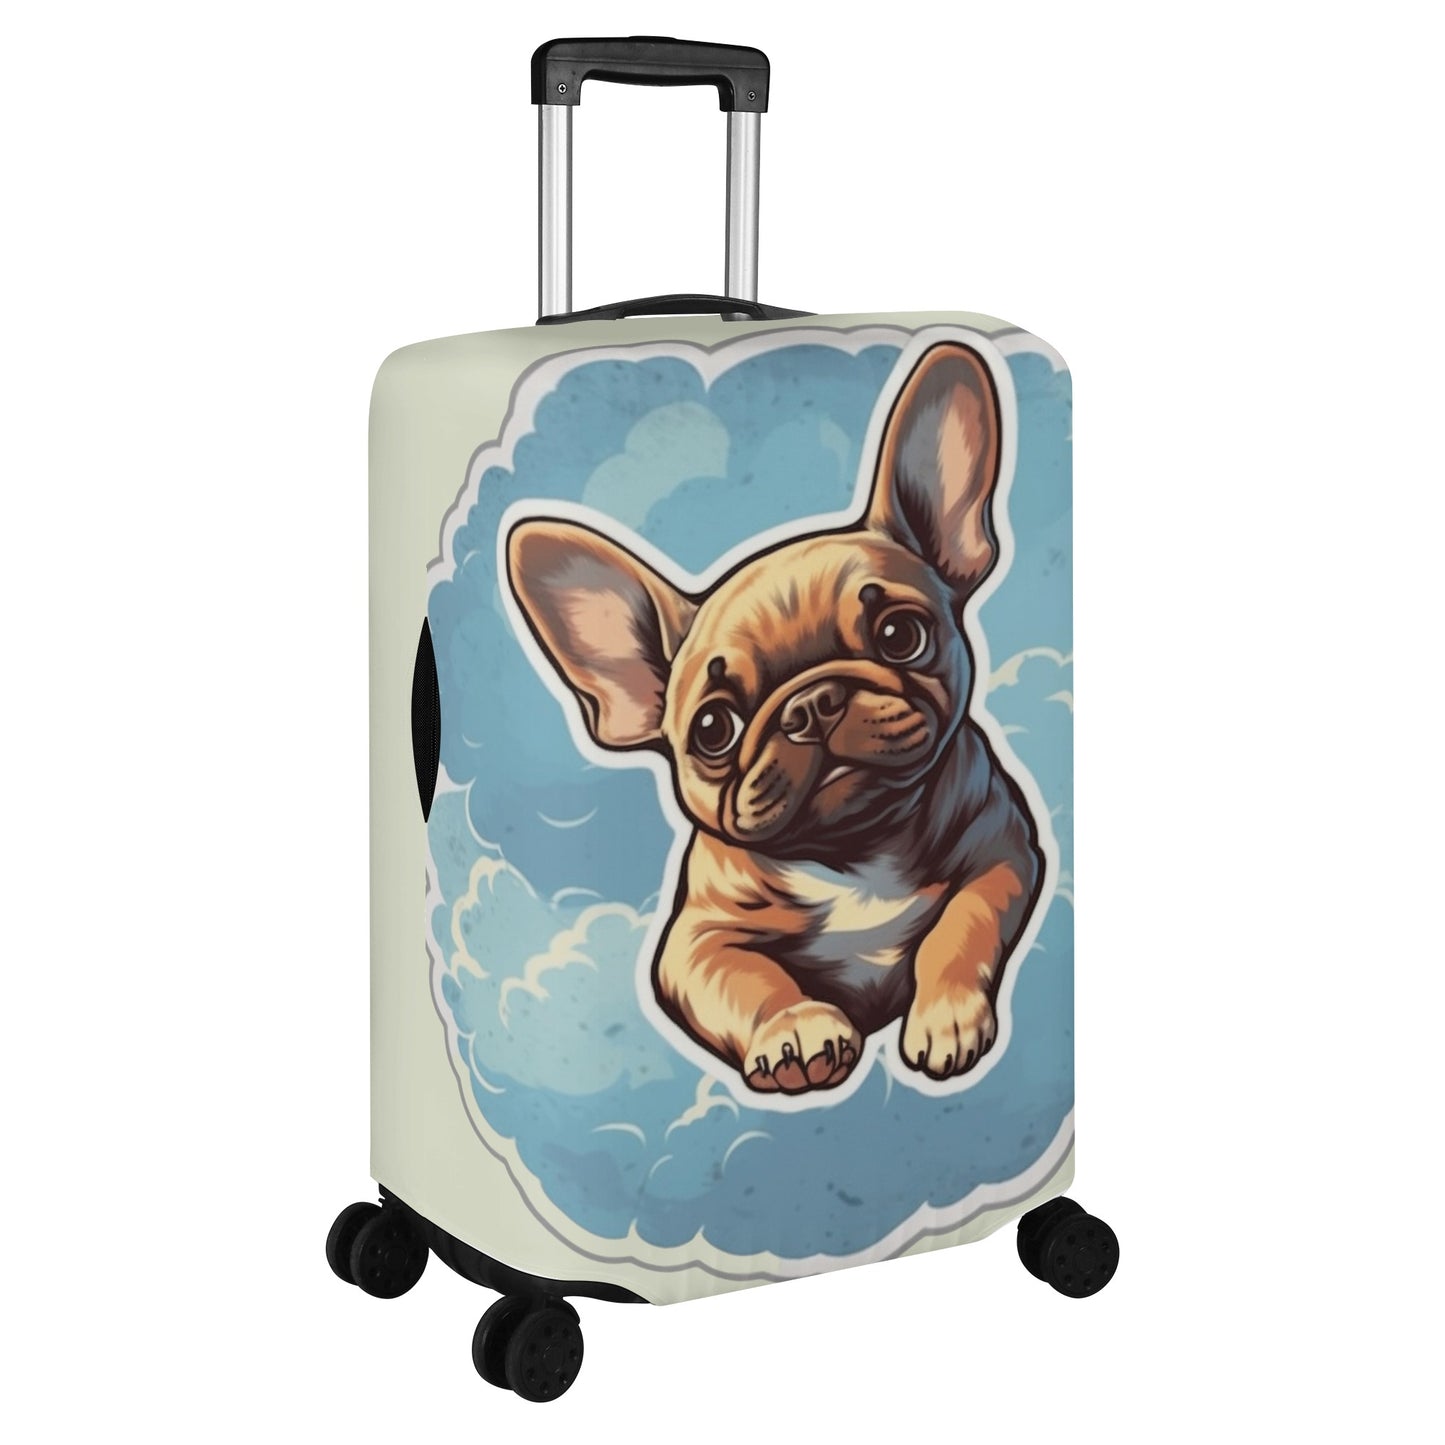 Buddy - Luggage Cover